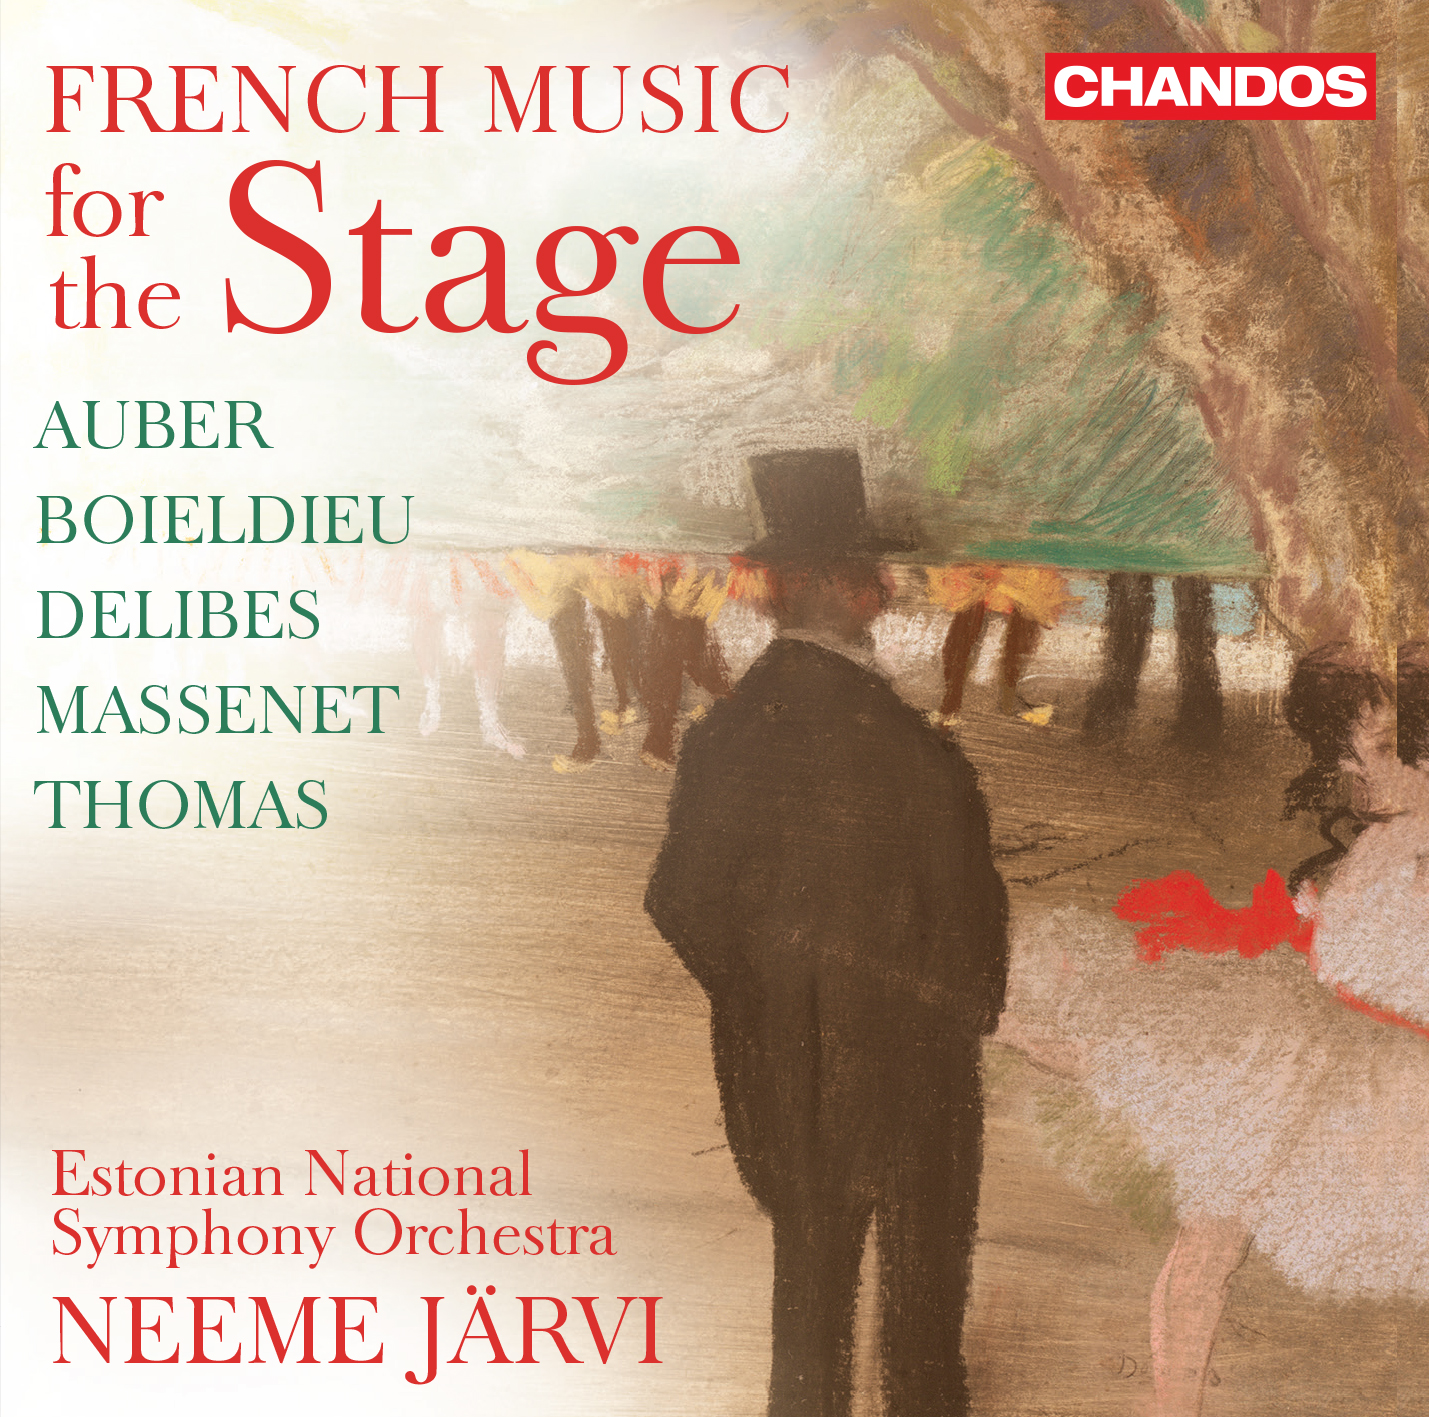 French Music For the Stage. Neeme Järvi. Chandos 2021